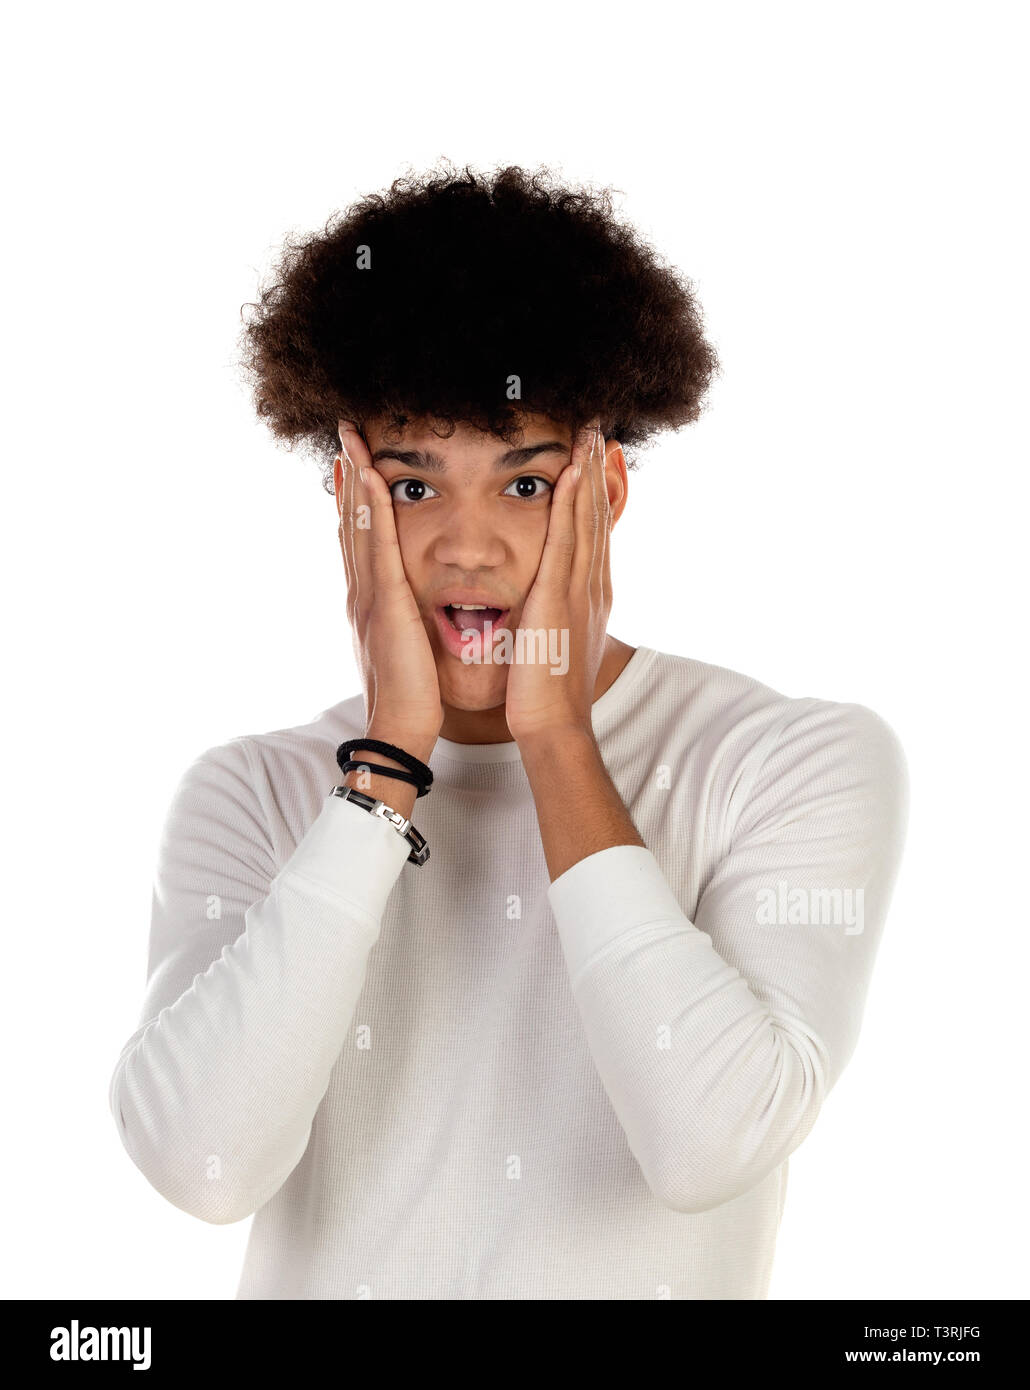 surprised guy with afro hairstyle isolated on a white